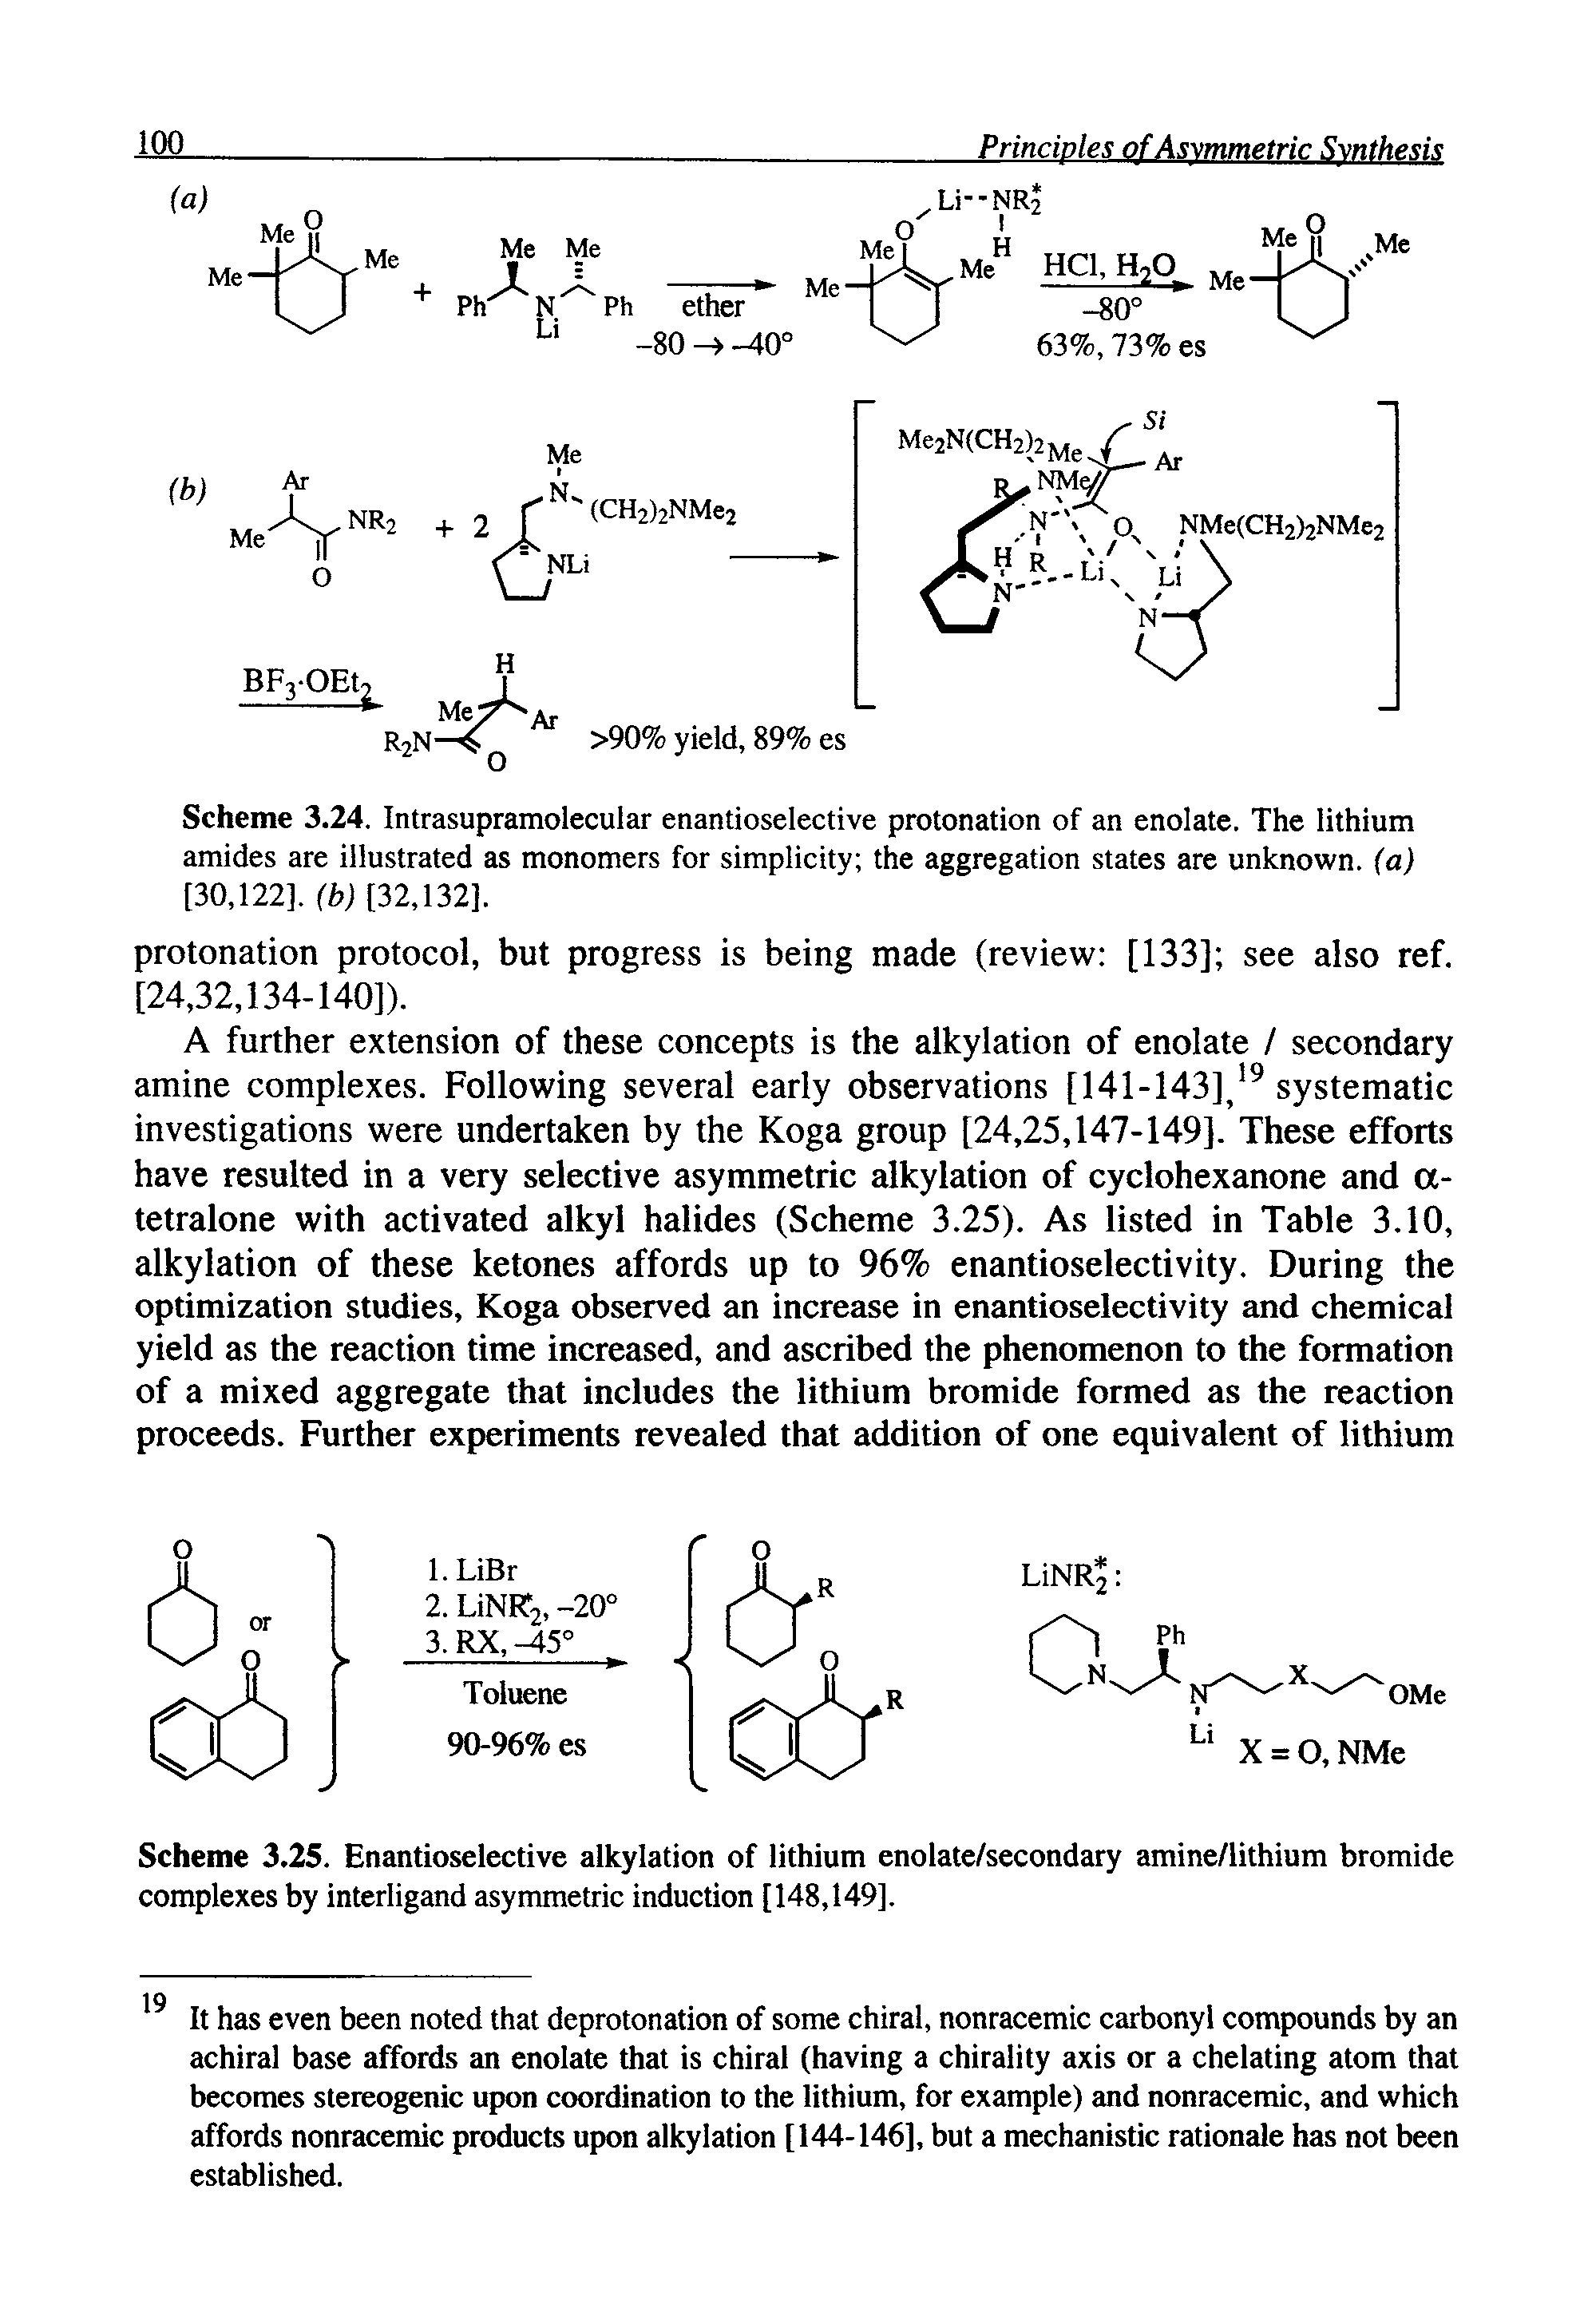 Scheme 3.25. Enantioselective alkylation of lithium enolate/secondary amine/lithium bromide complexes by interligand asymmetric induction [148,149].